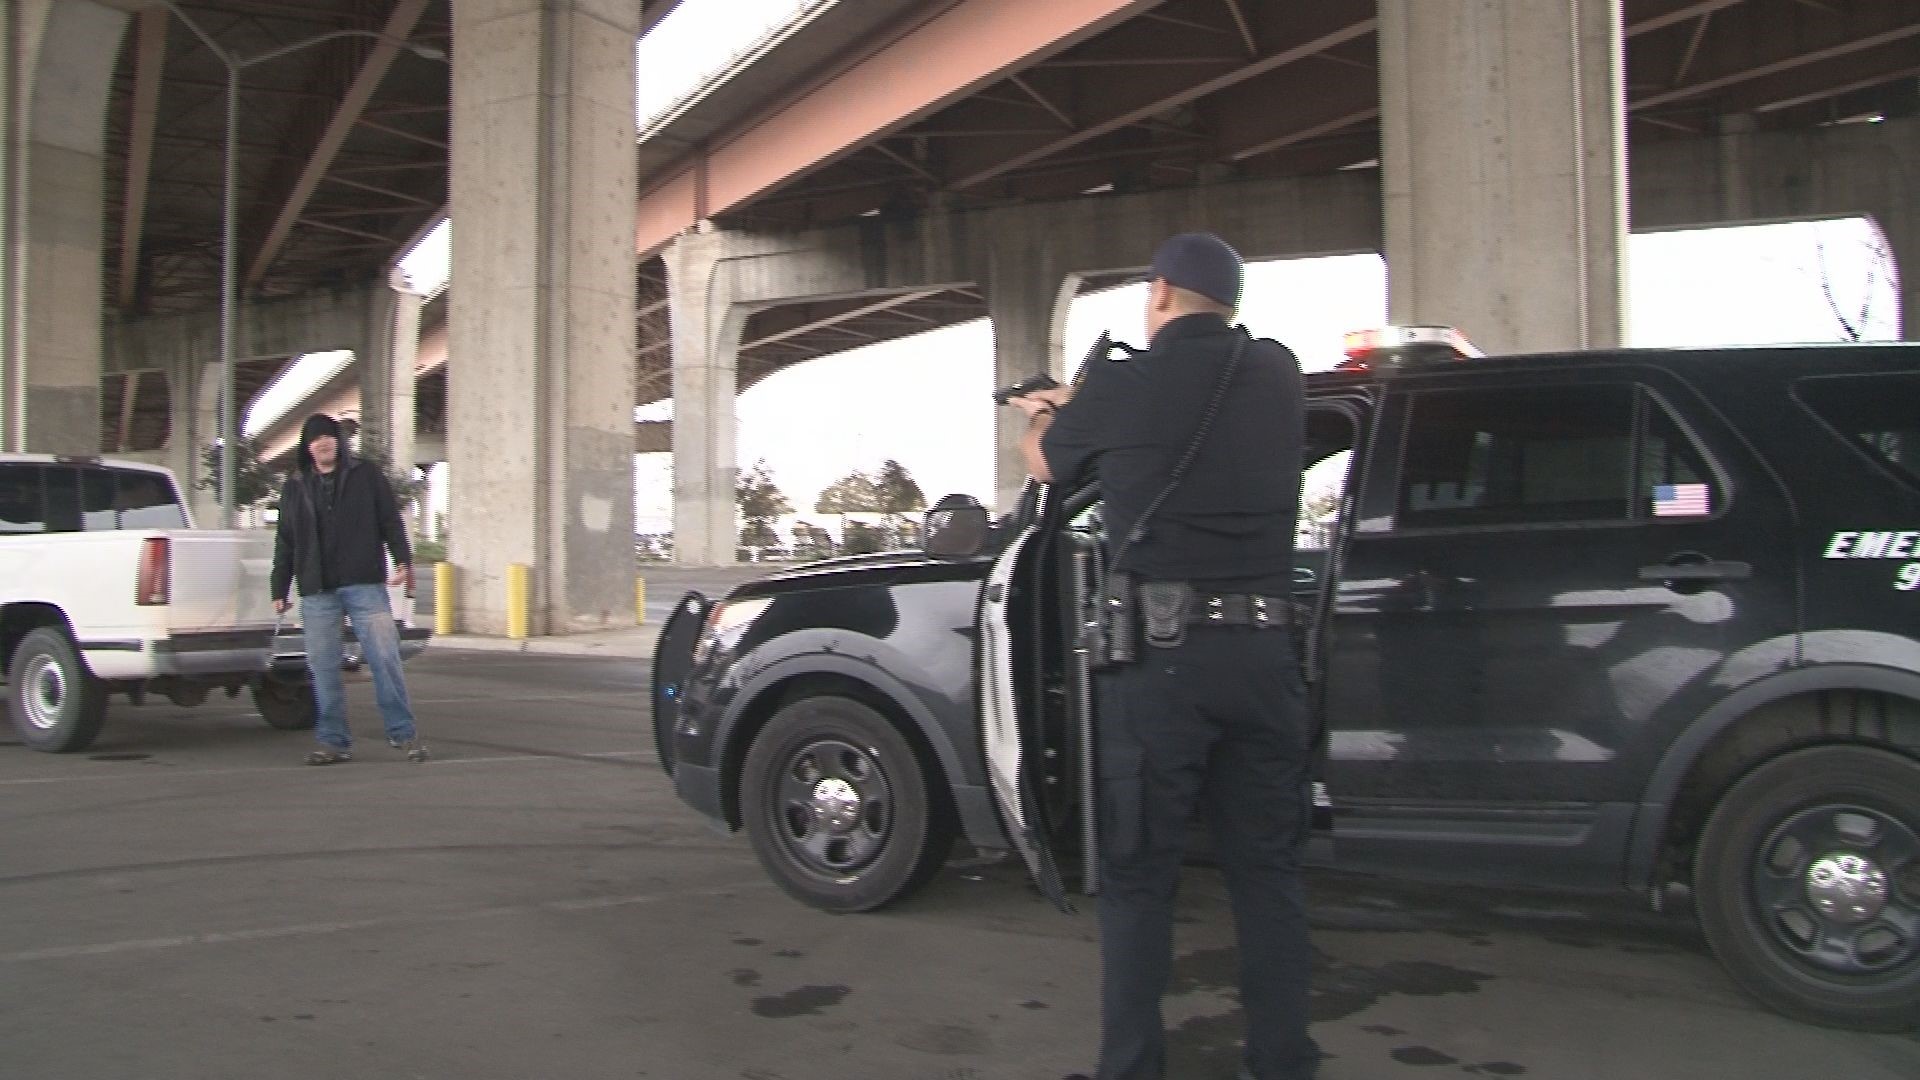 After 6 months in the police academy, Stockton police recruits undergo 6 more weeks of more "stressful" situational training to make sure they can succeed on the street.